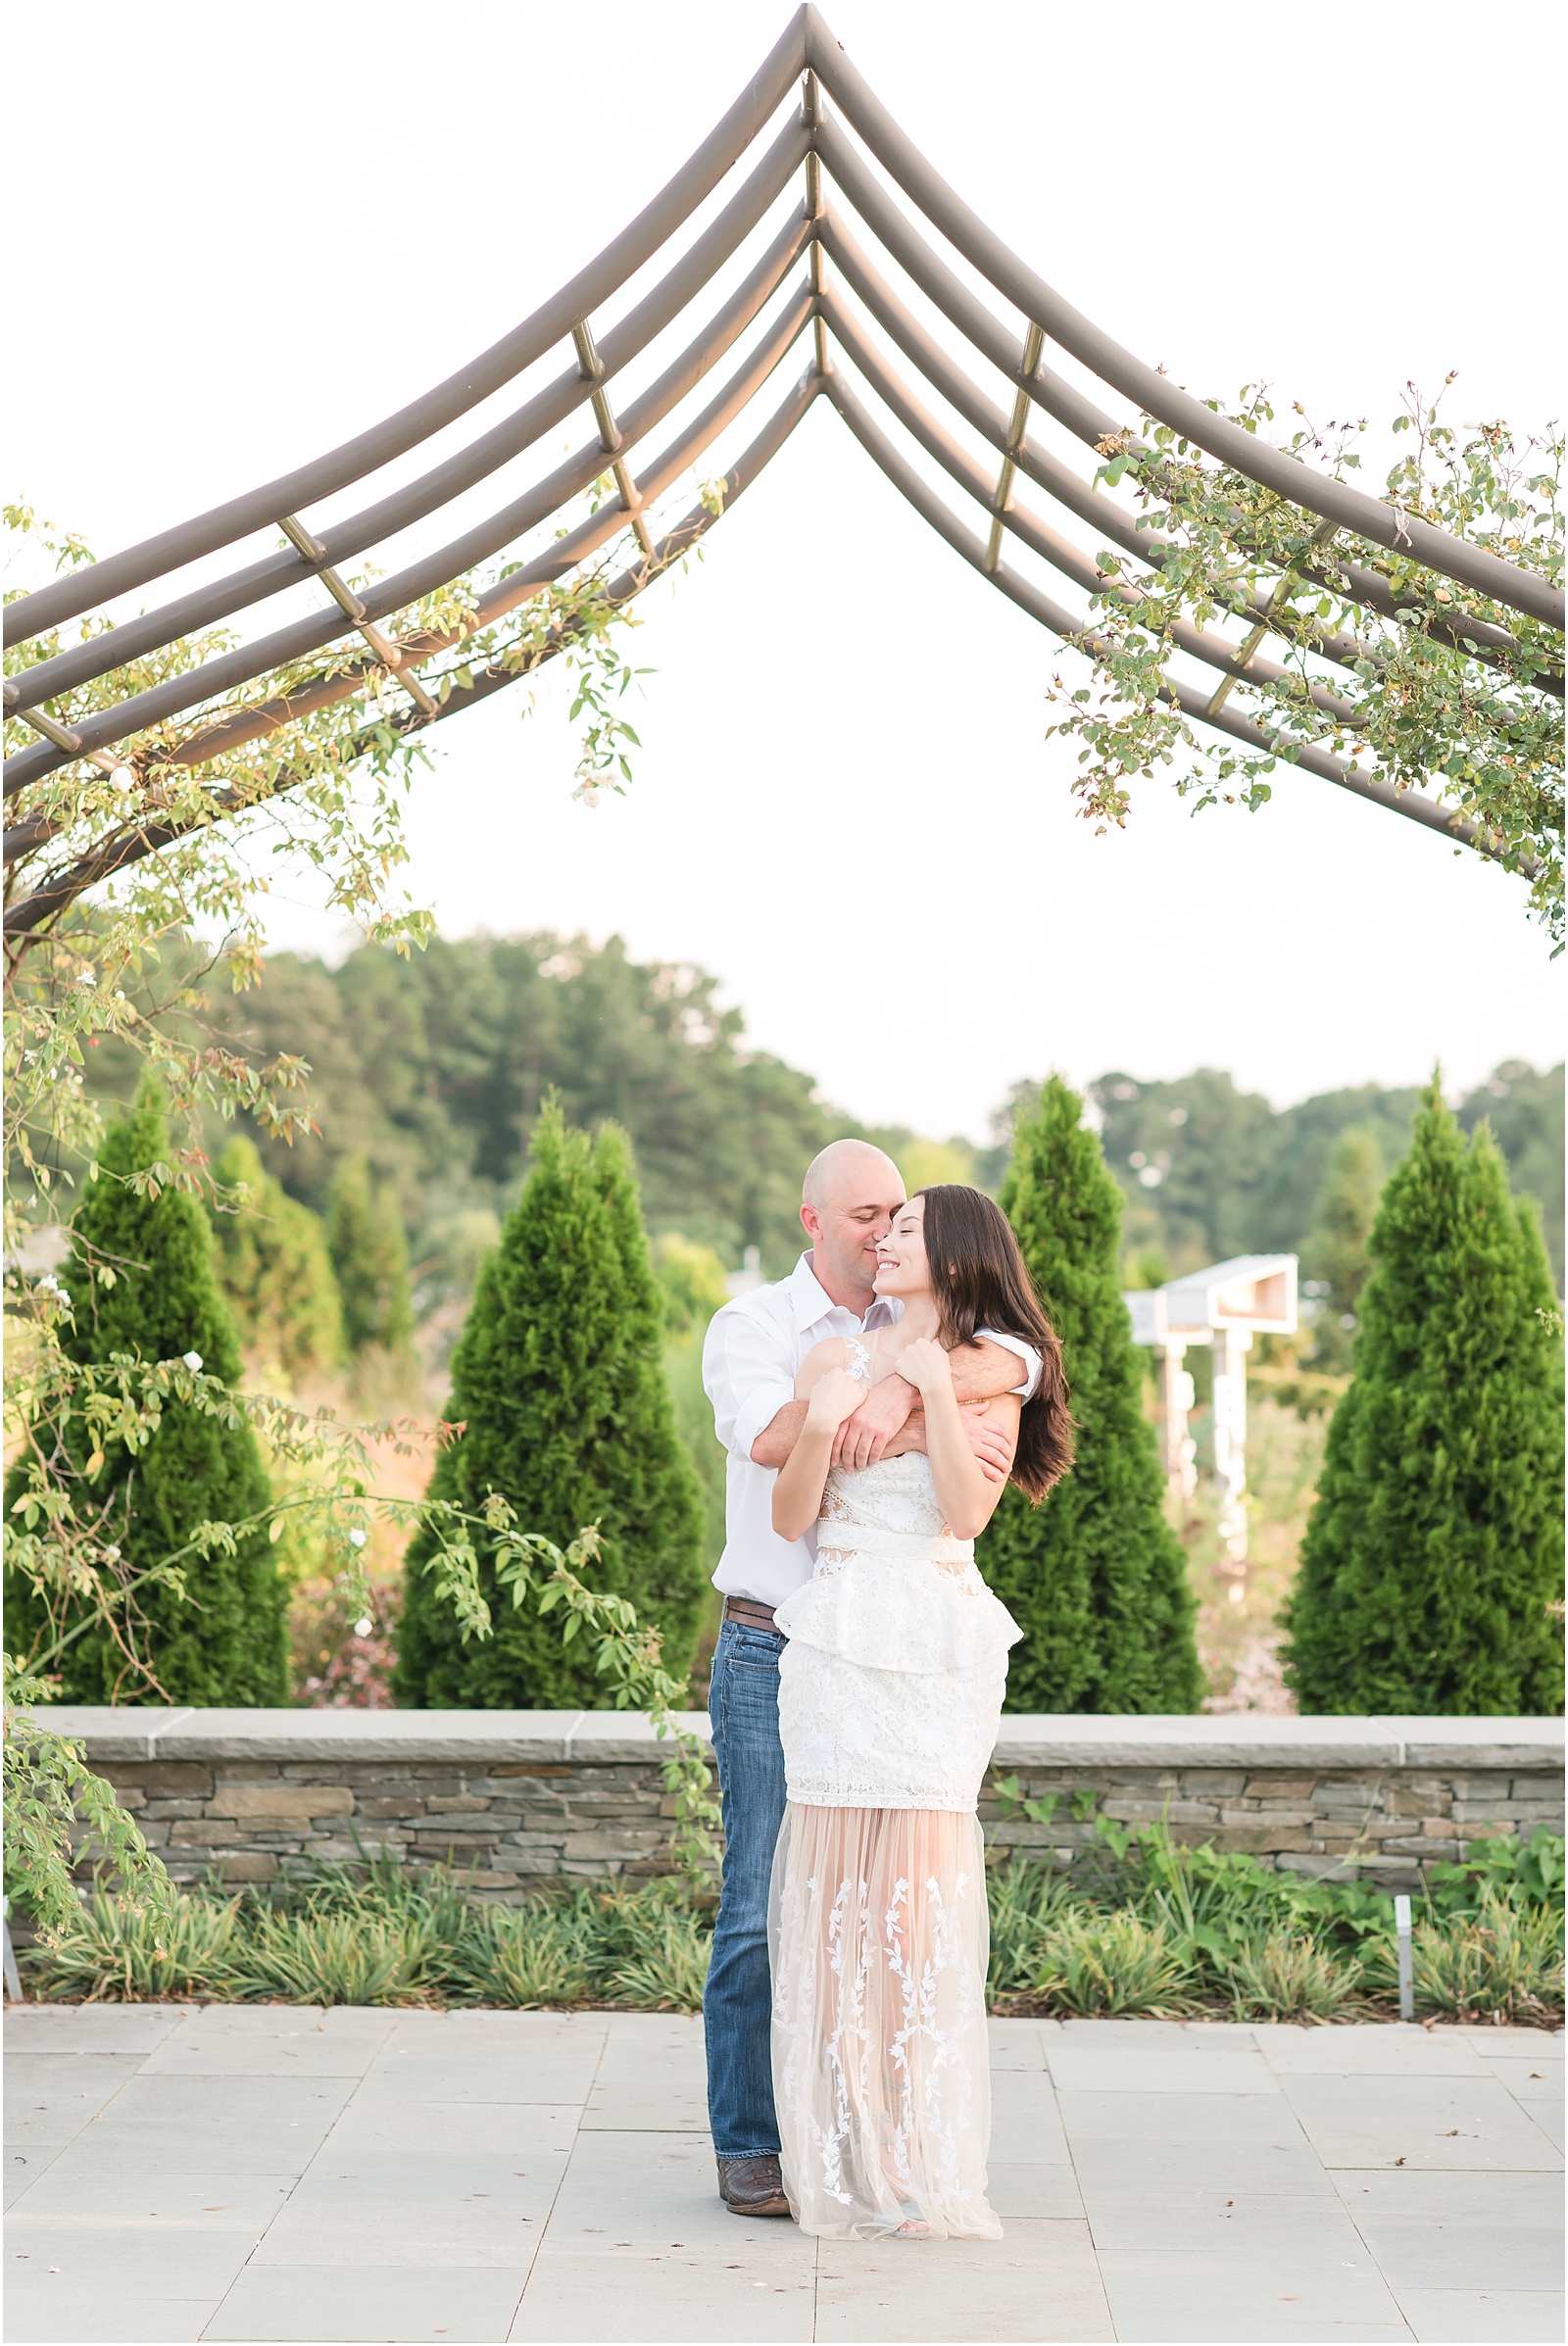 a man wearing a white snuggling up from behind with a woman wearing a white dress with dusty blue heels underneath a vine arbor at JC Raulston Arboretum